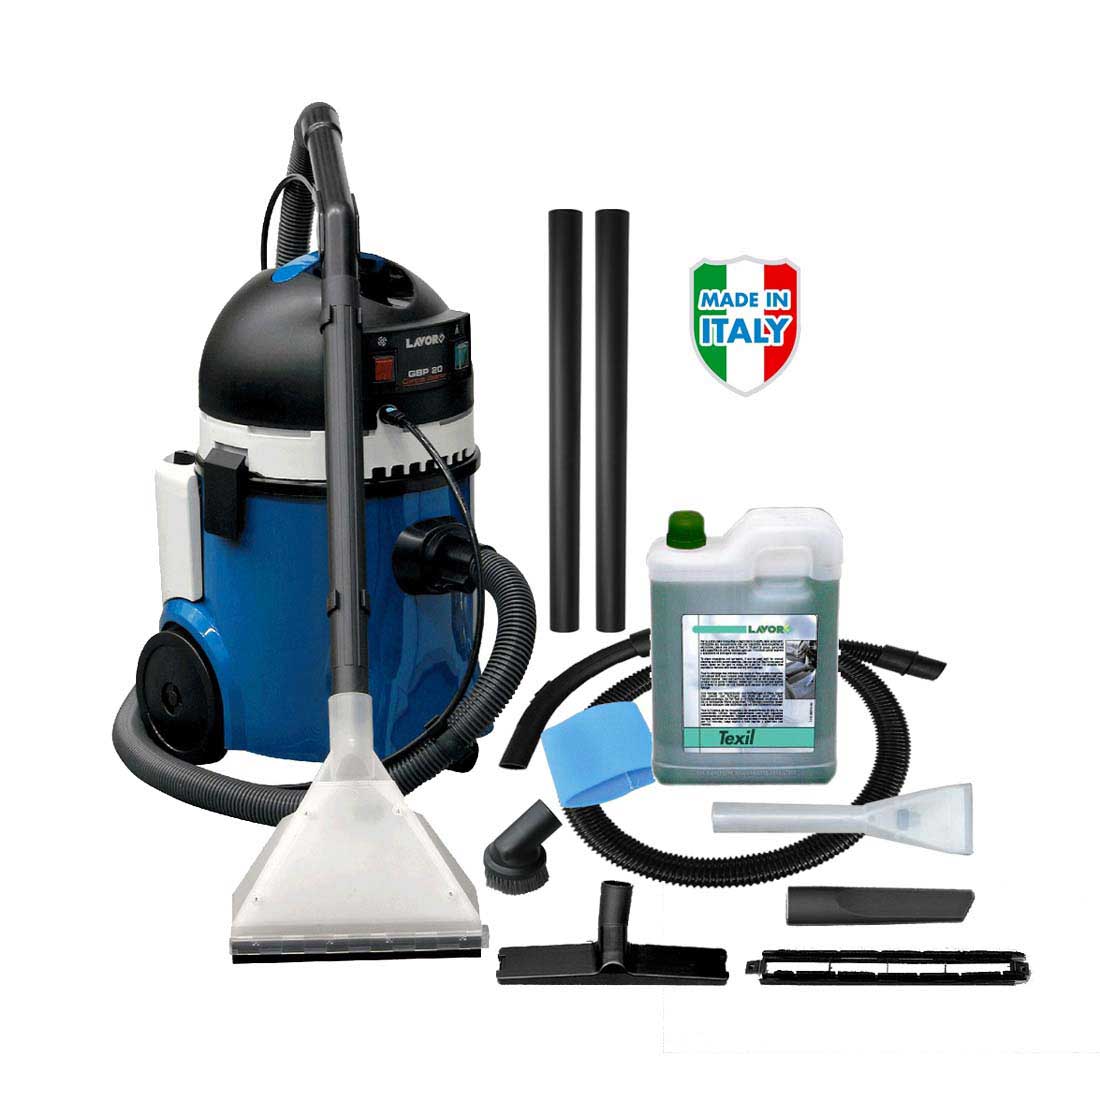 A vacuum cleaner for washing living rooms with Italian soap, GBP 20